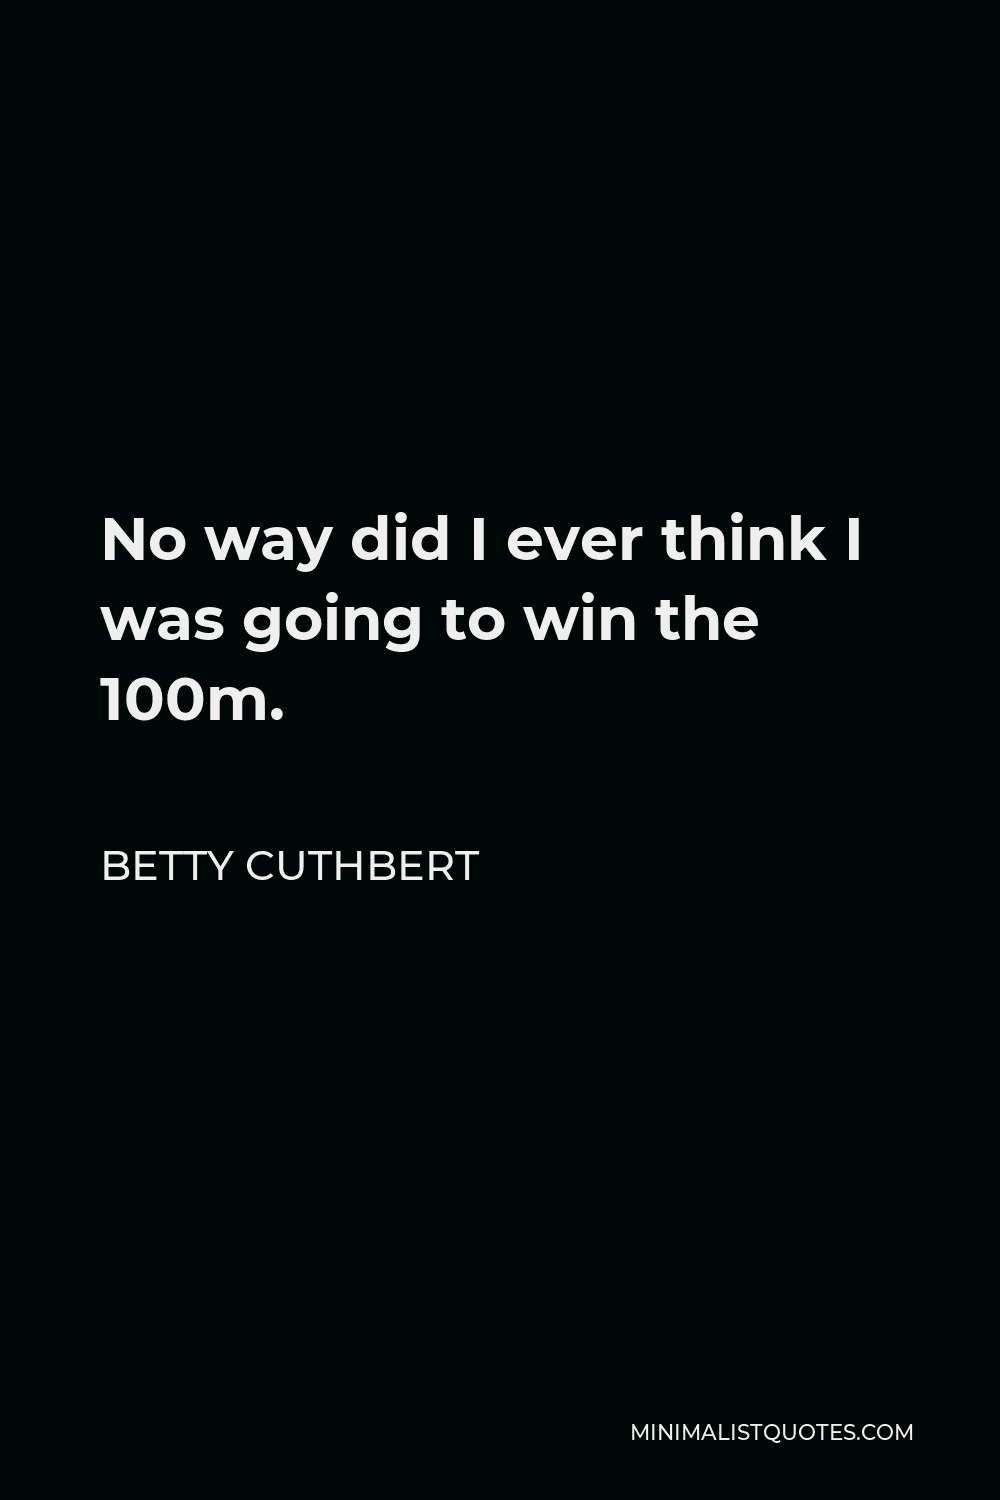 Betty Cuthbert Quote - No way did I ever think I was going to win the 100m.